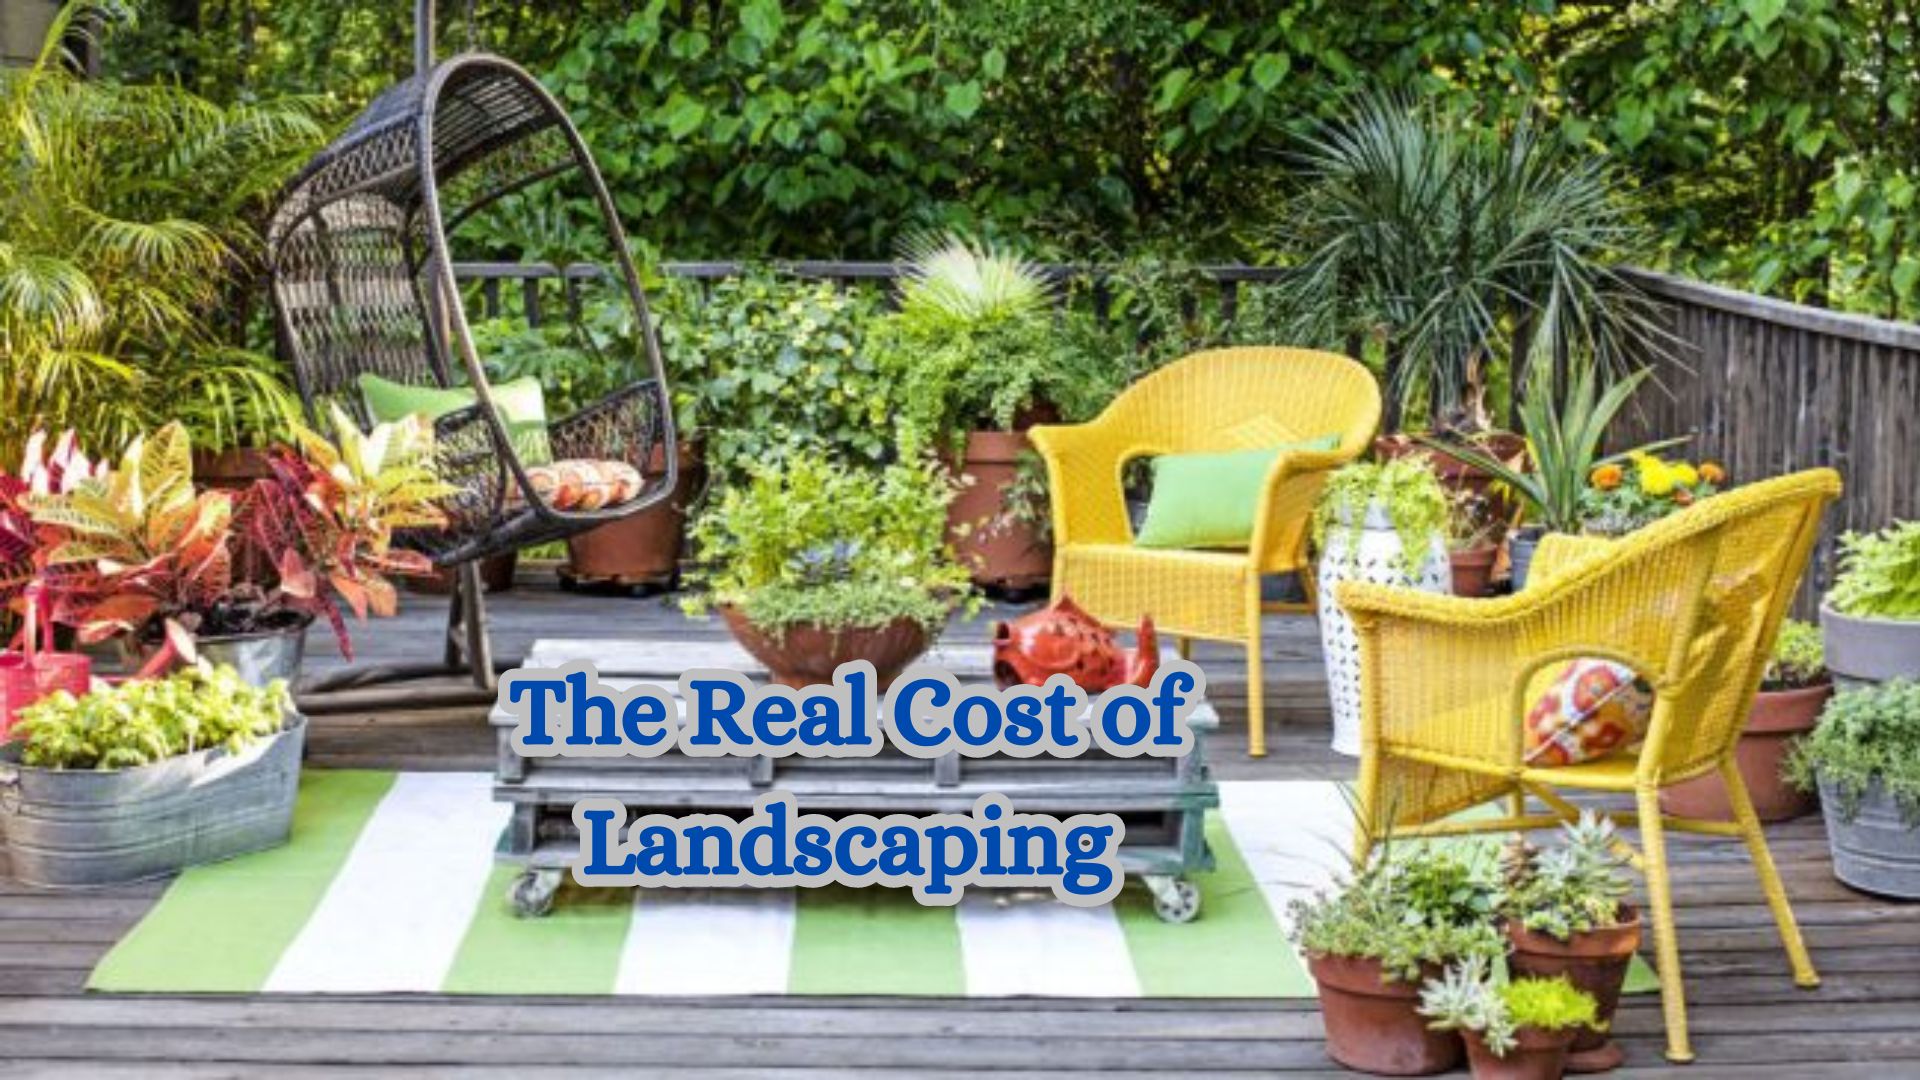 The Real Cost of Landscaping.